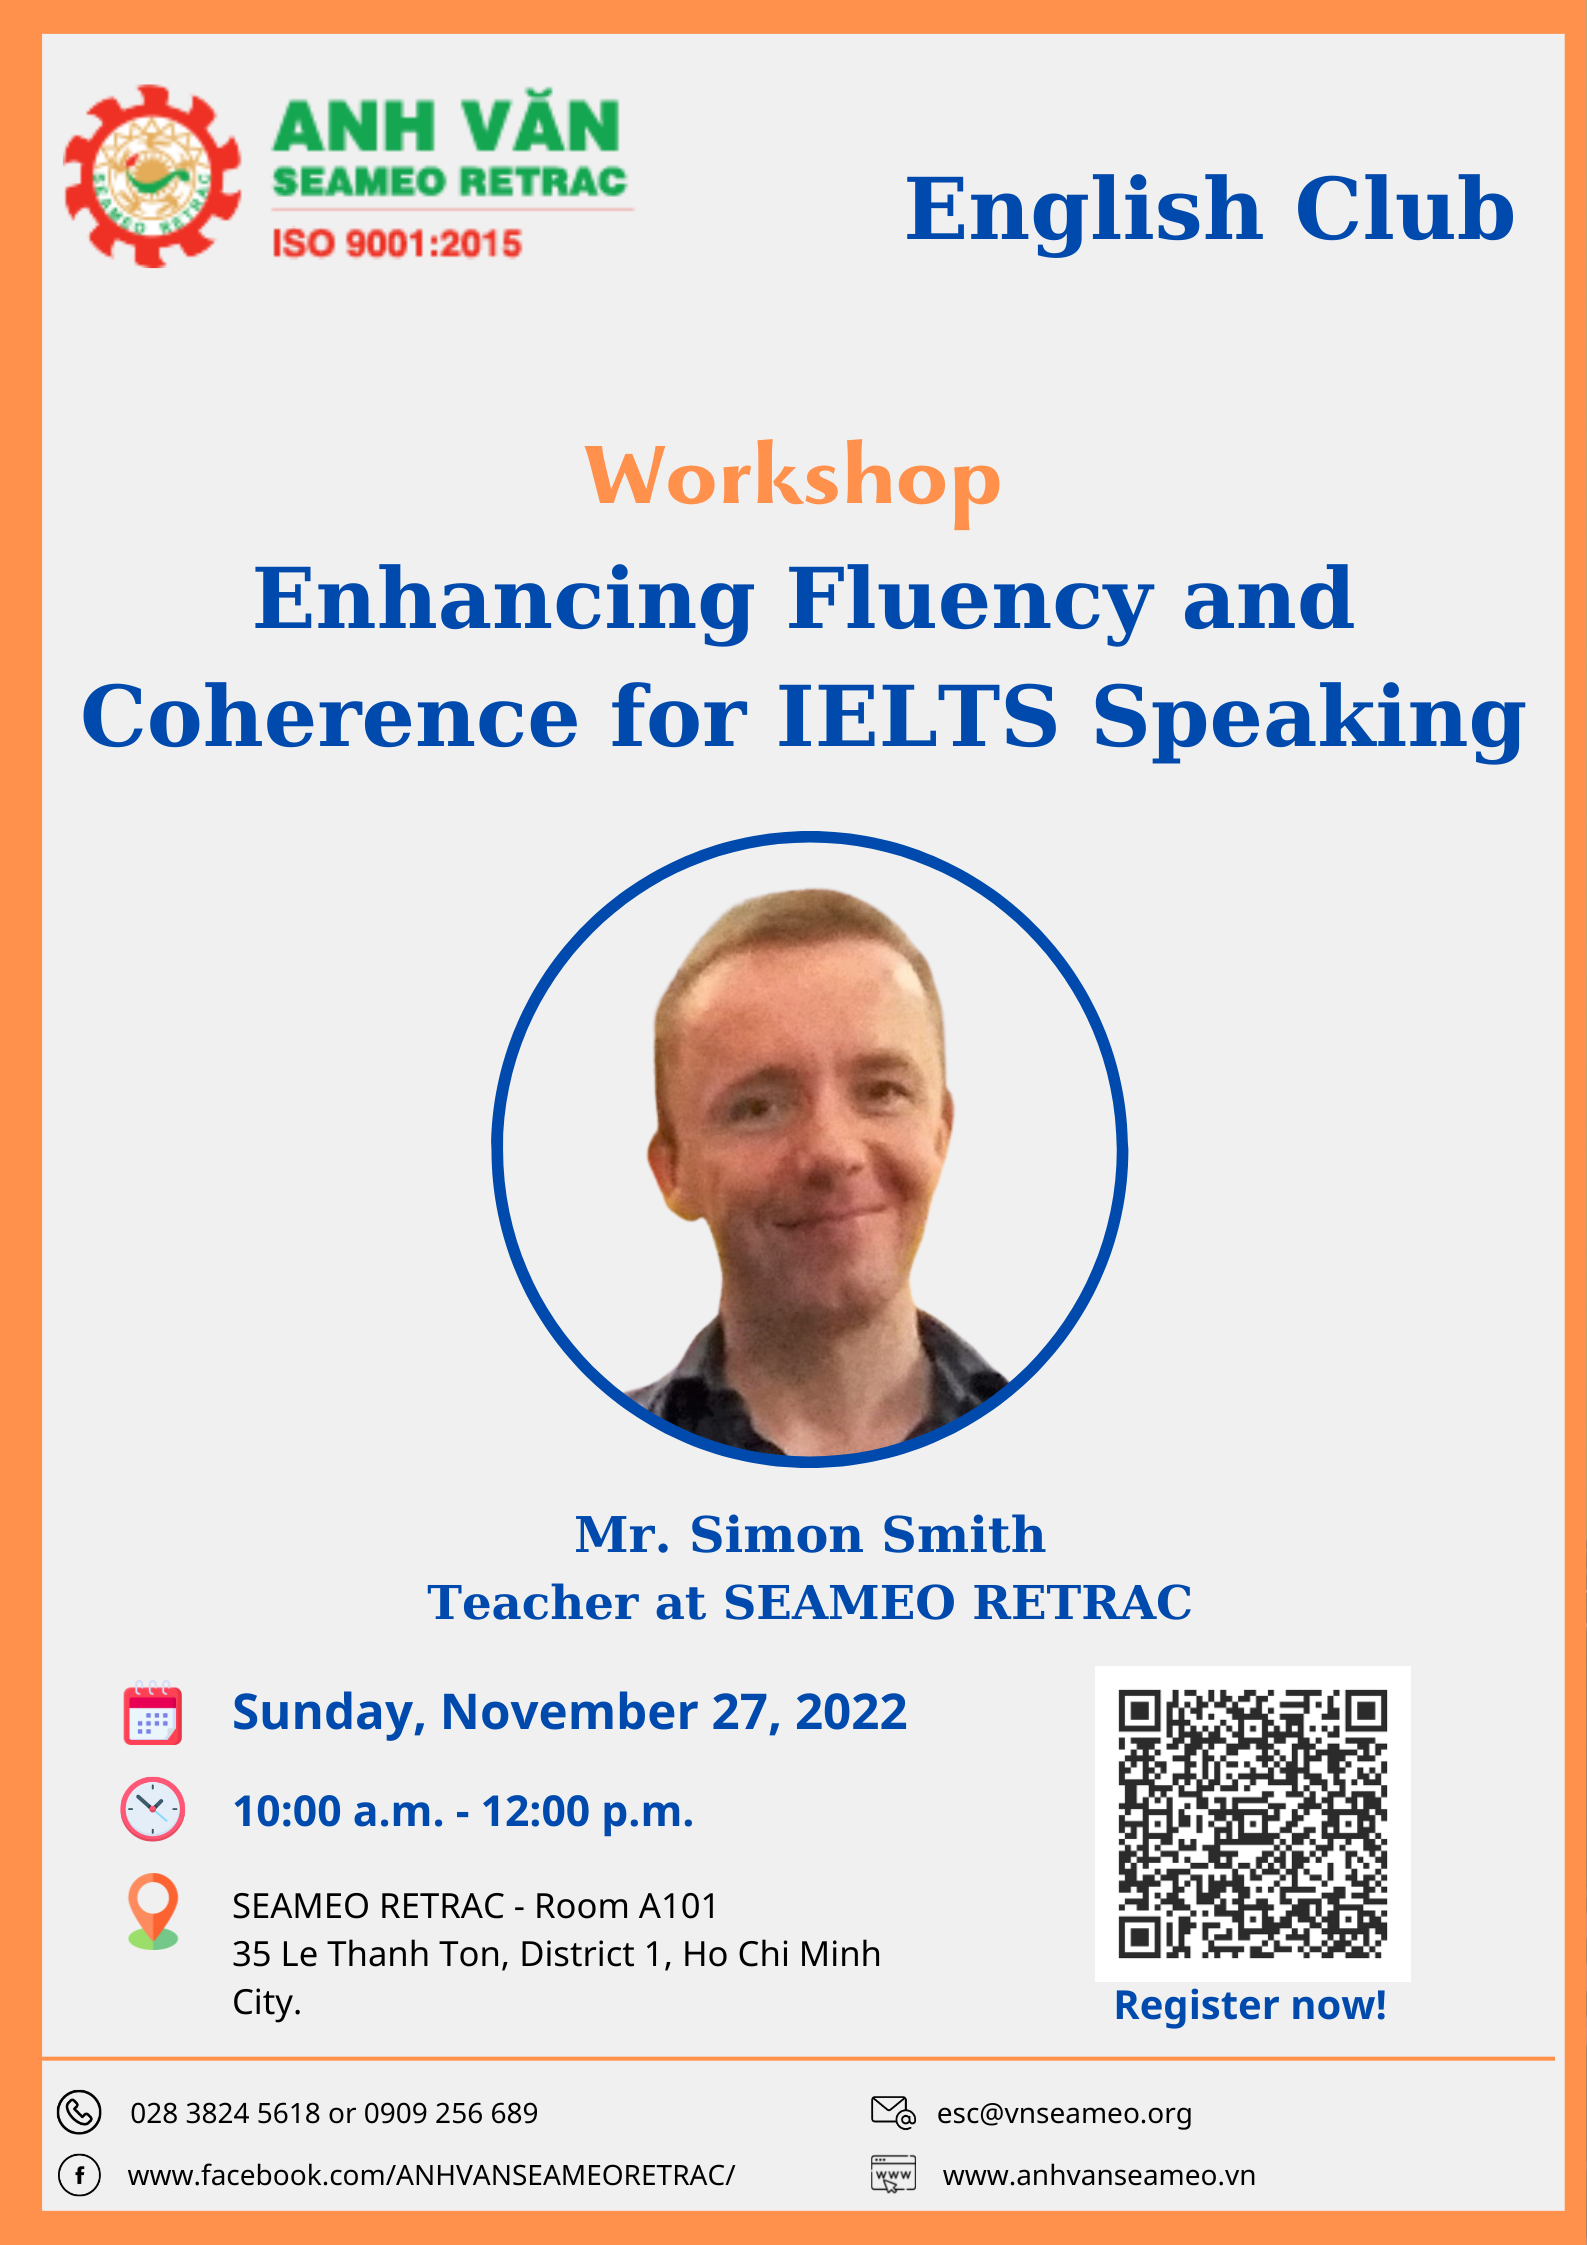 Workshop titled “Enhancing Fluency and Coherence for IELTS Speaking”